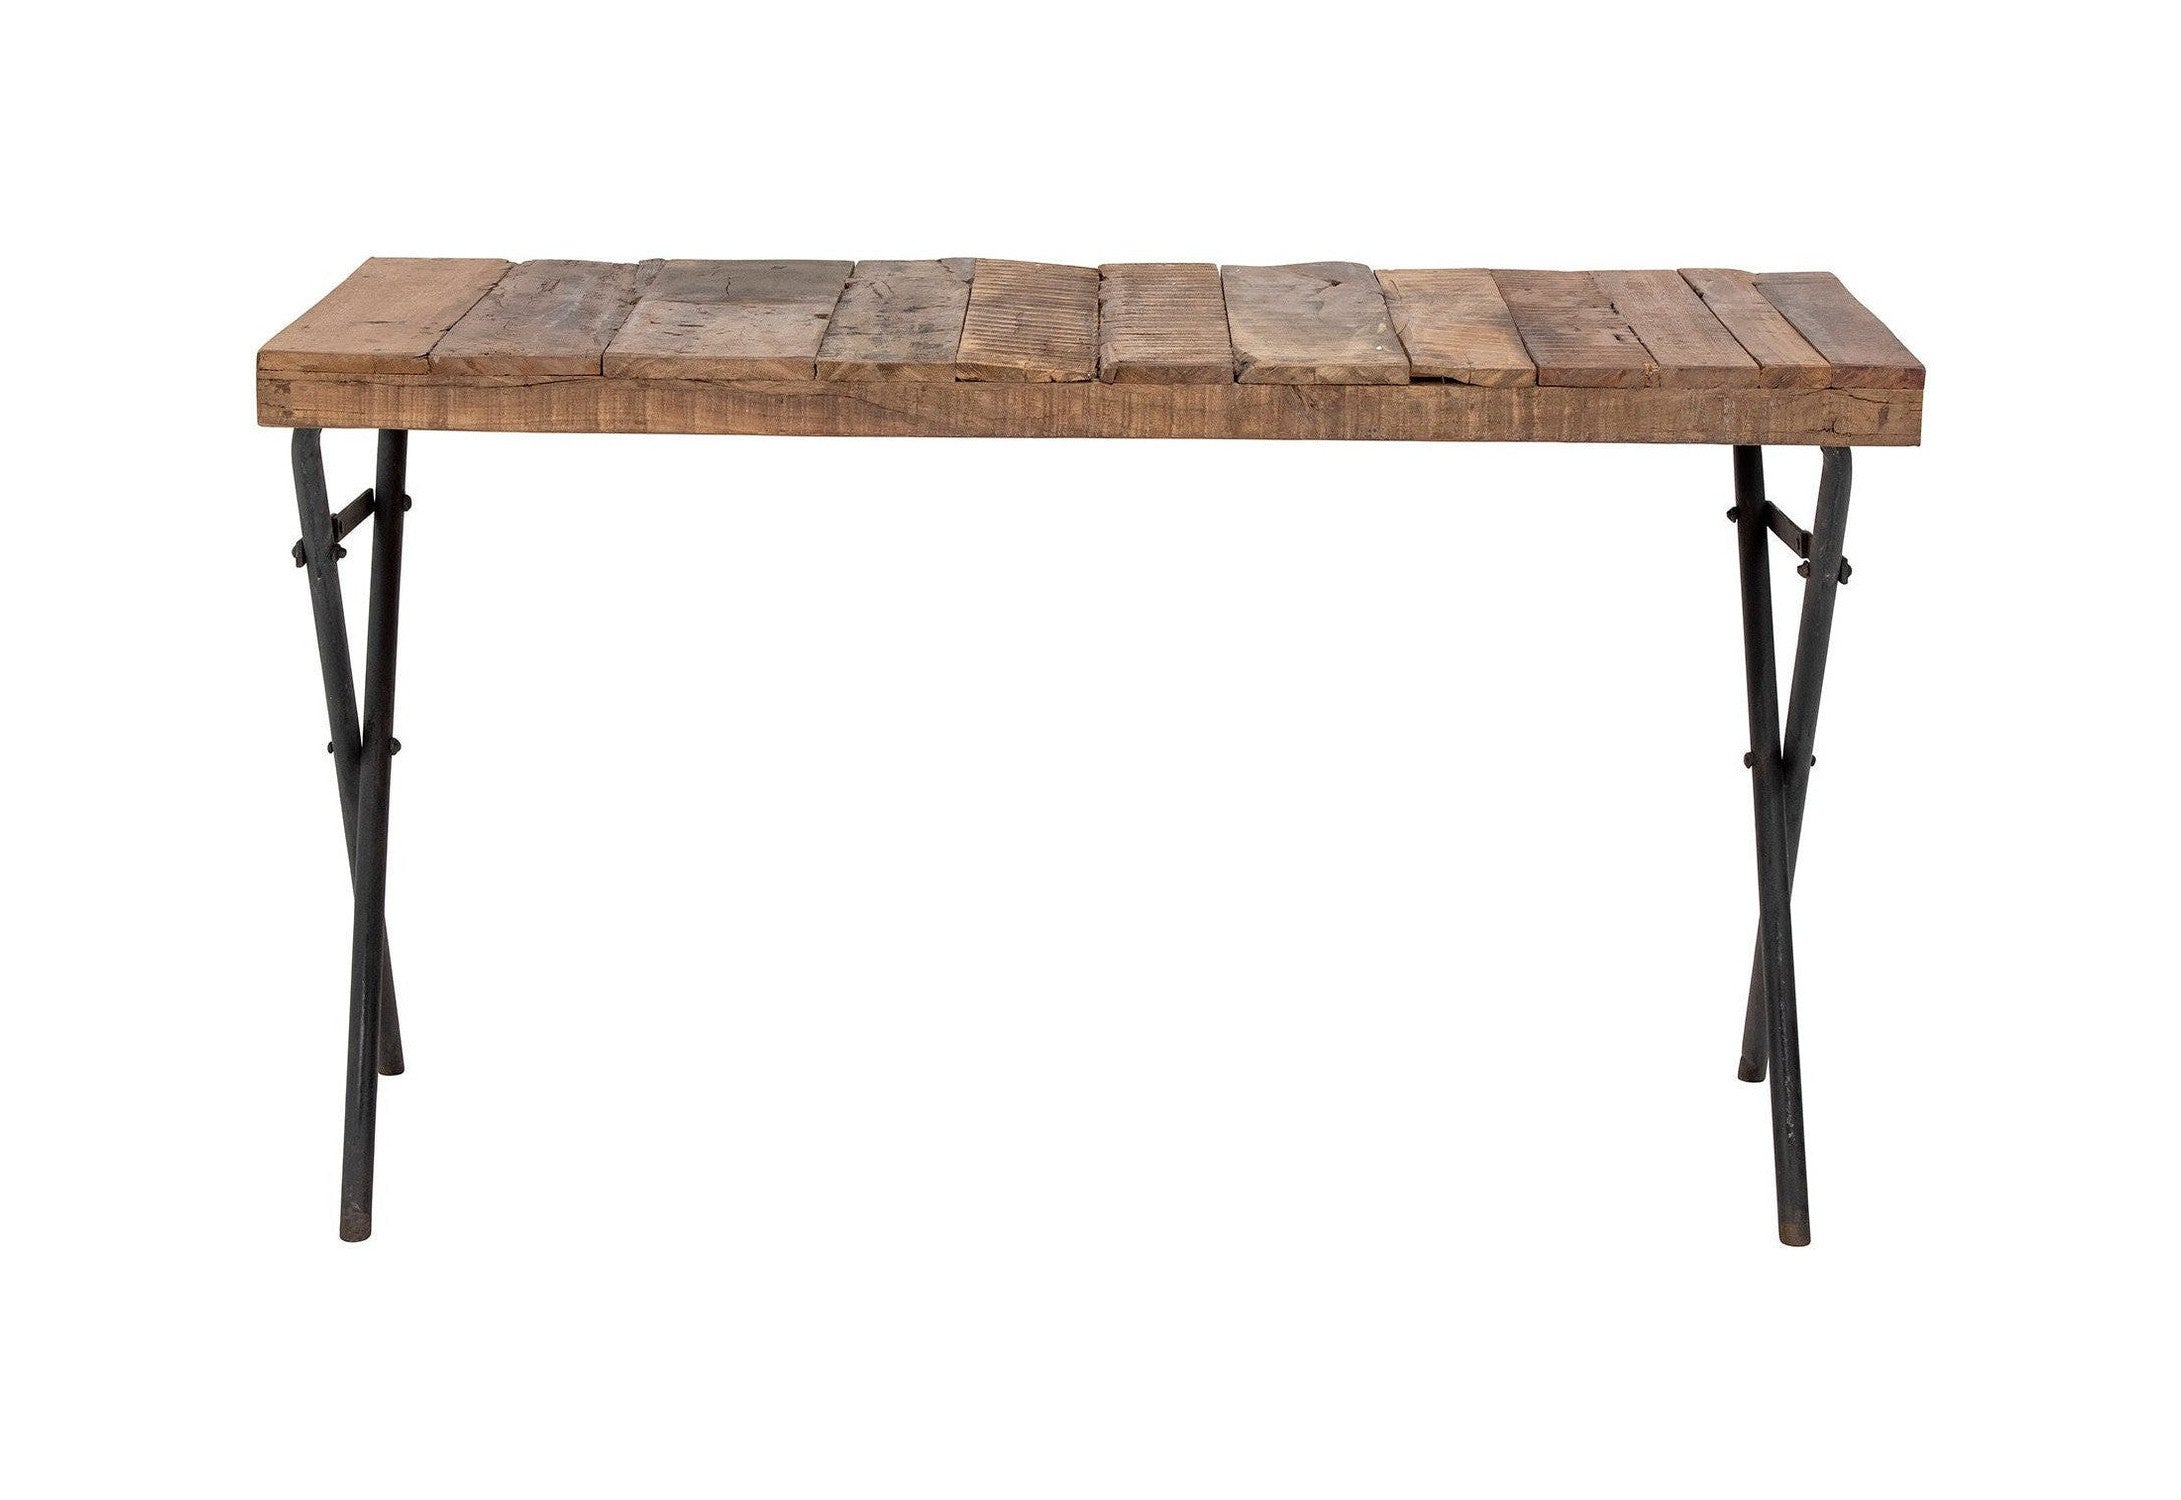 Creative Collection Mauie Dining Table, Nature, Reclaimed Wood